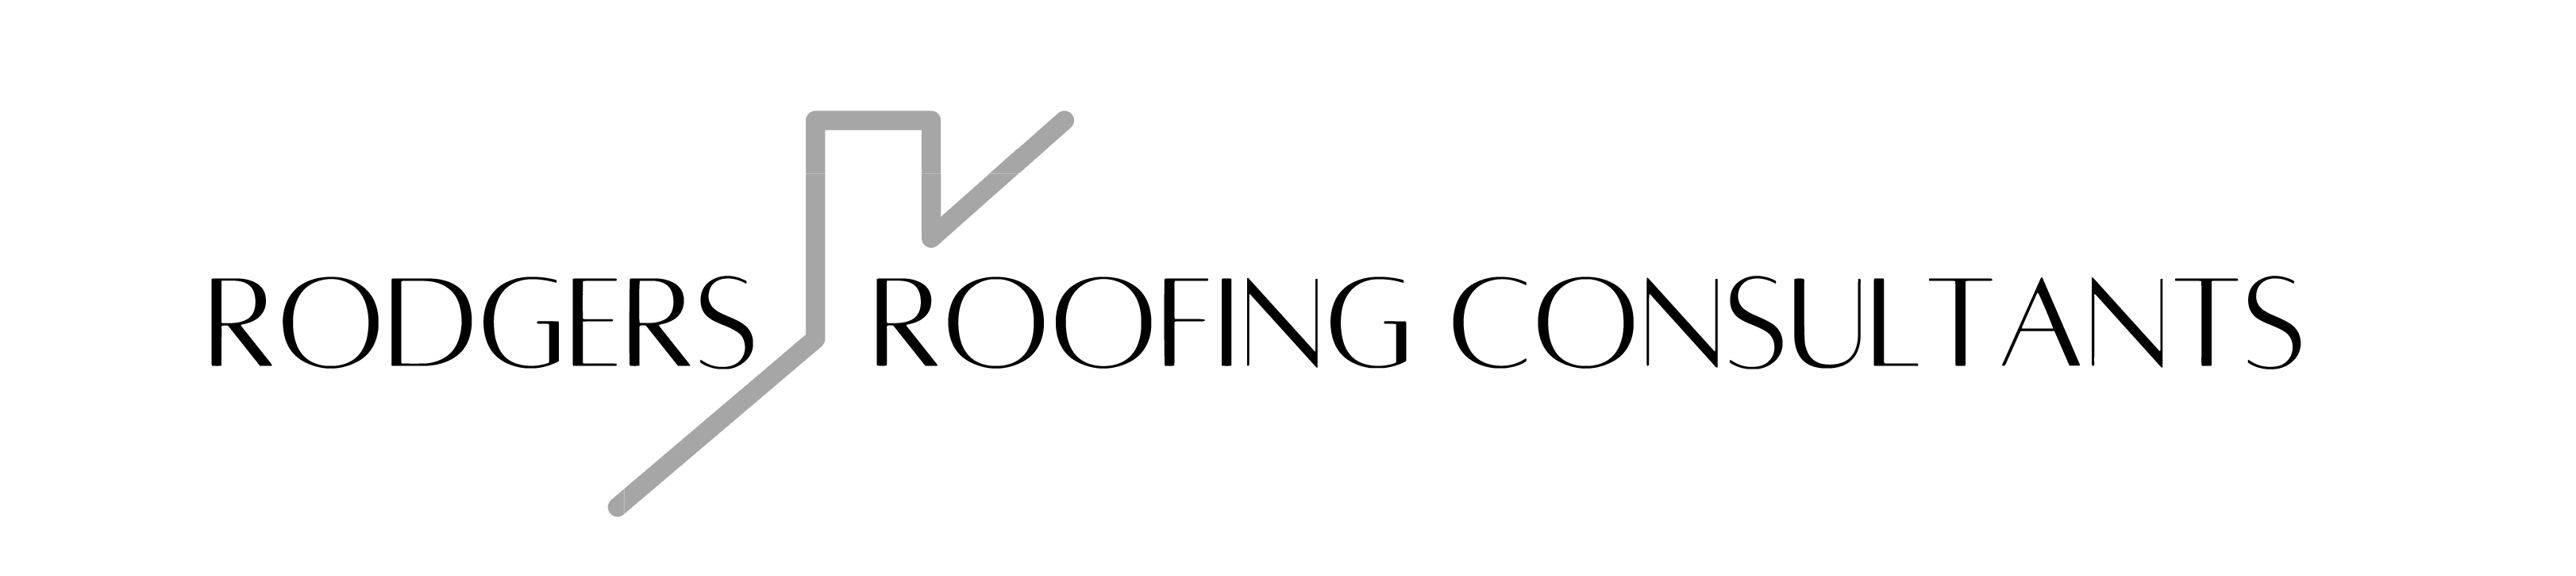 Rodger Roofing Consutant Logo